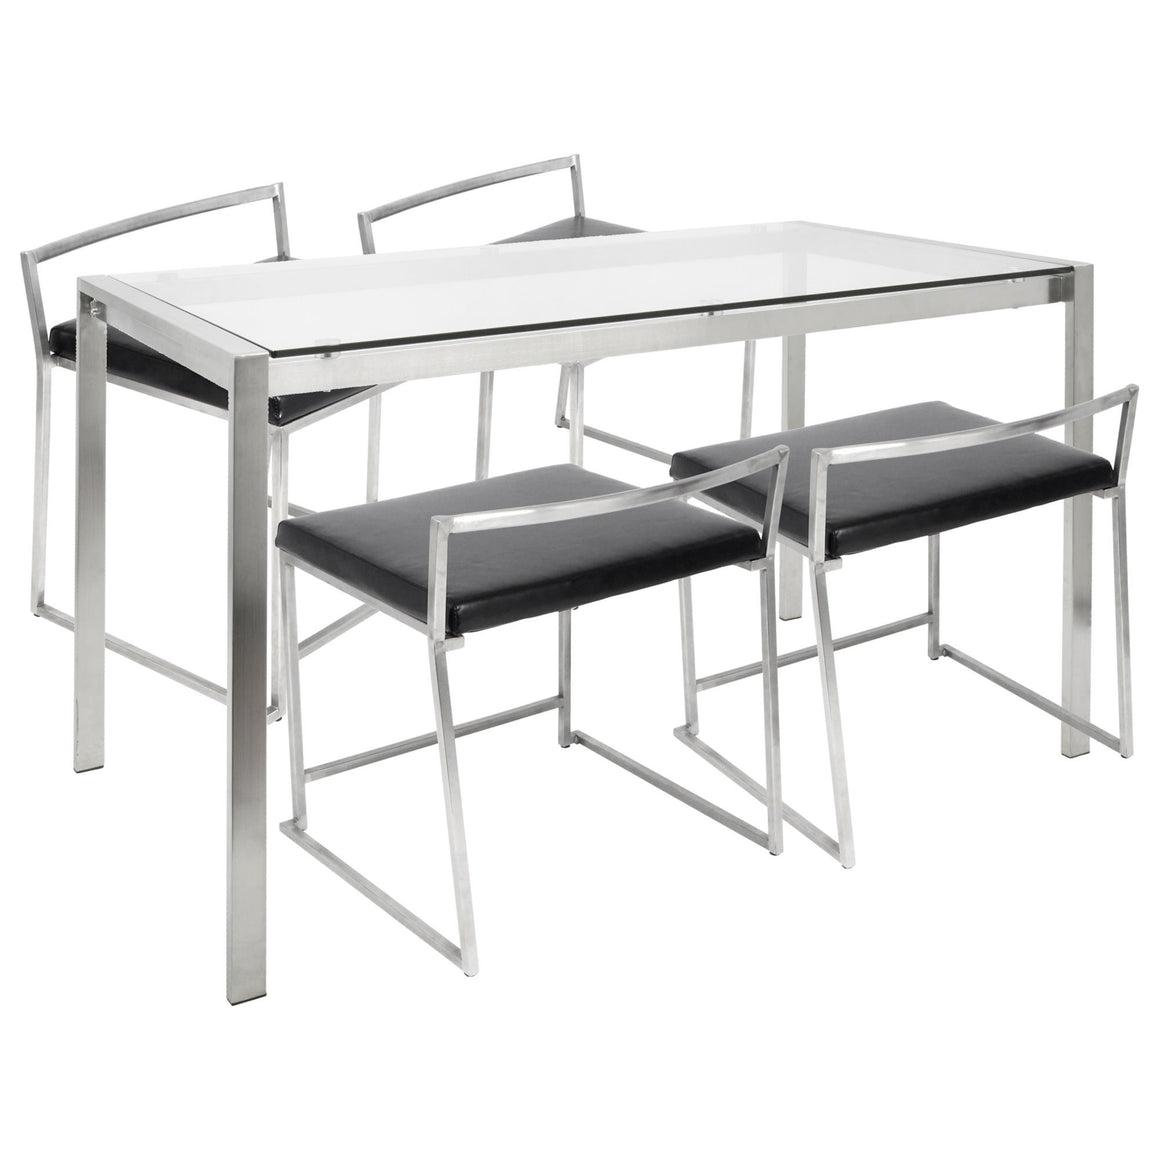 Fuji 5-Piece Contemporary Dining Set in Stainless Steel and Black Faux Leather by LumiSource